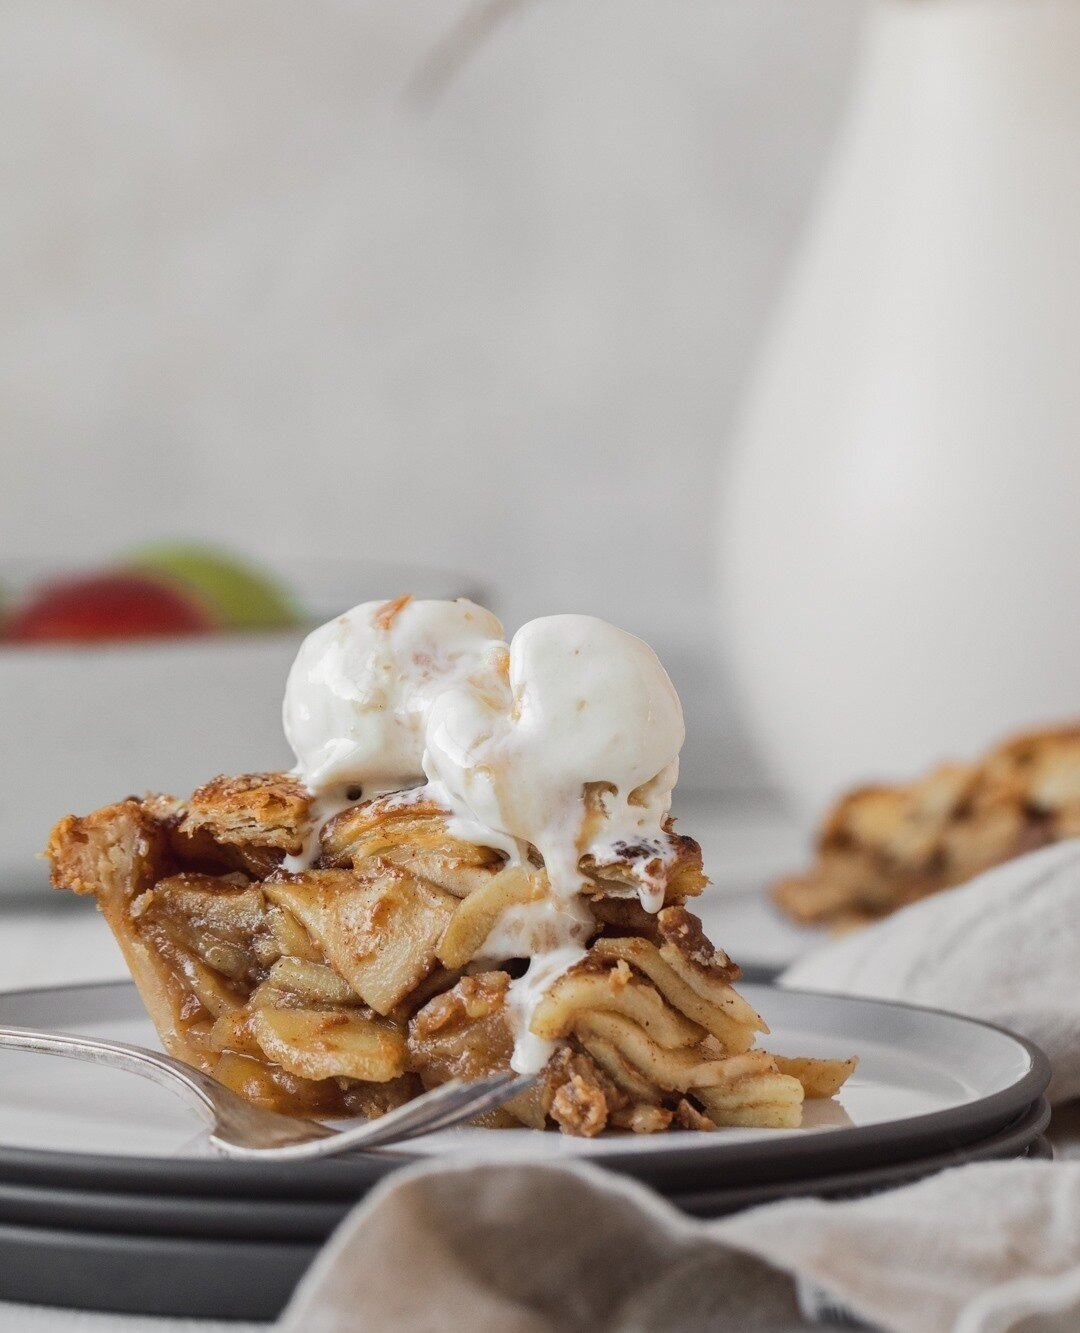 Happy Pi Day! As an engineer and a baker, I especially geek out over this holiday that perfectly blends my culinerdiness. Definitely drooling over this stacked peanut butter caramel apple pie that is truly best eaten warm with a giant, melting scoop 